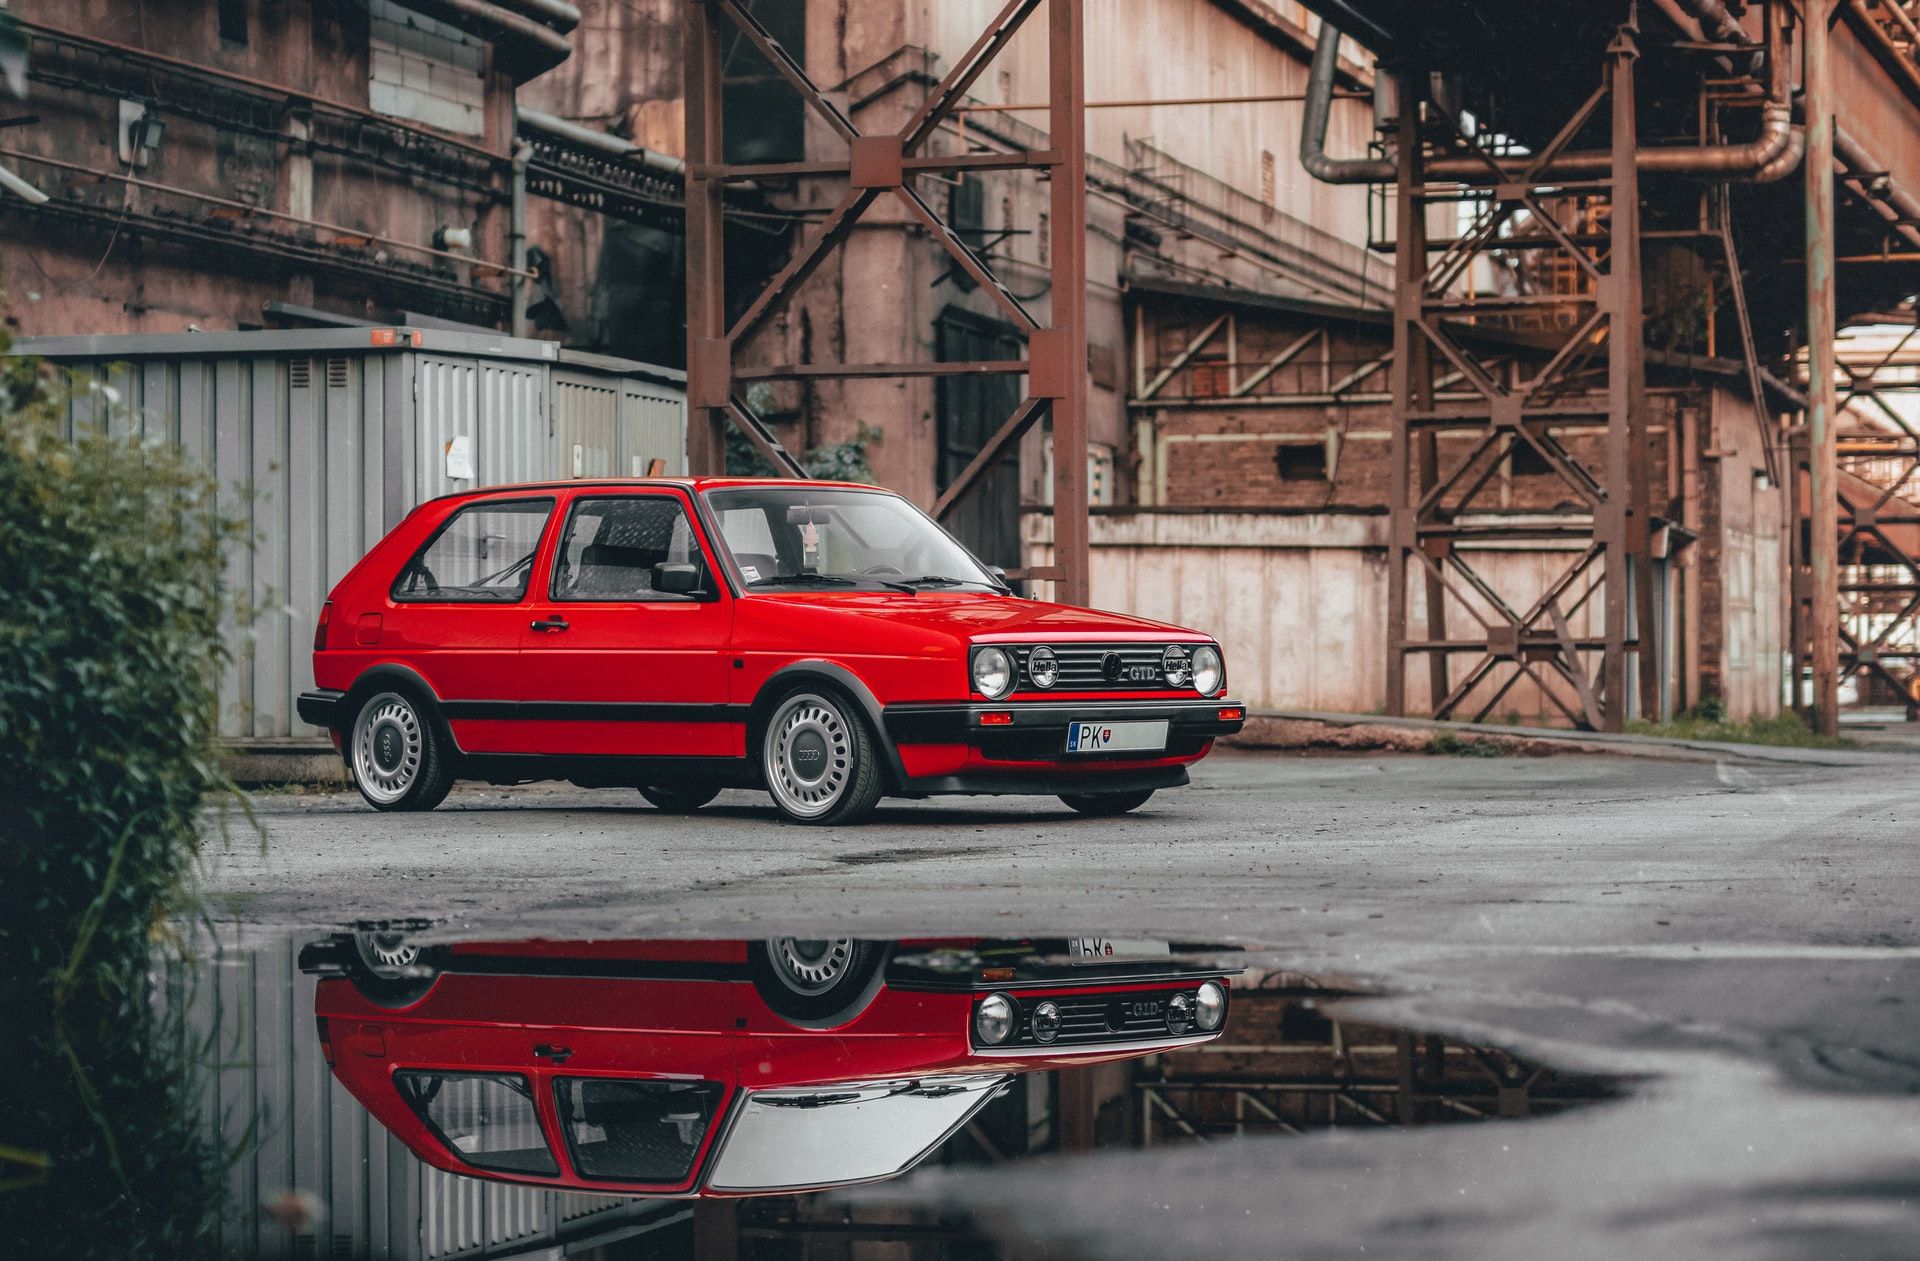 A red wagon shot at a low angle with reflection in a puddle